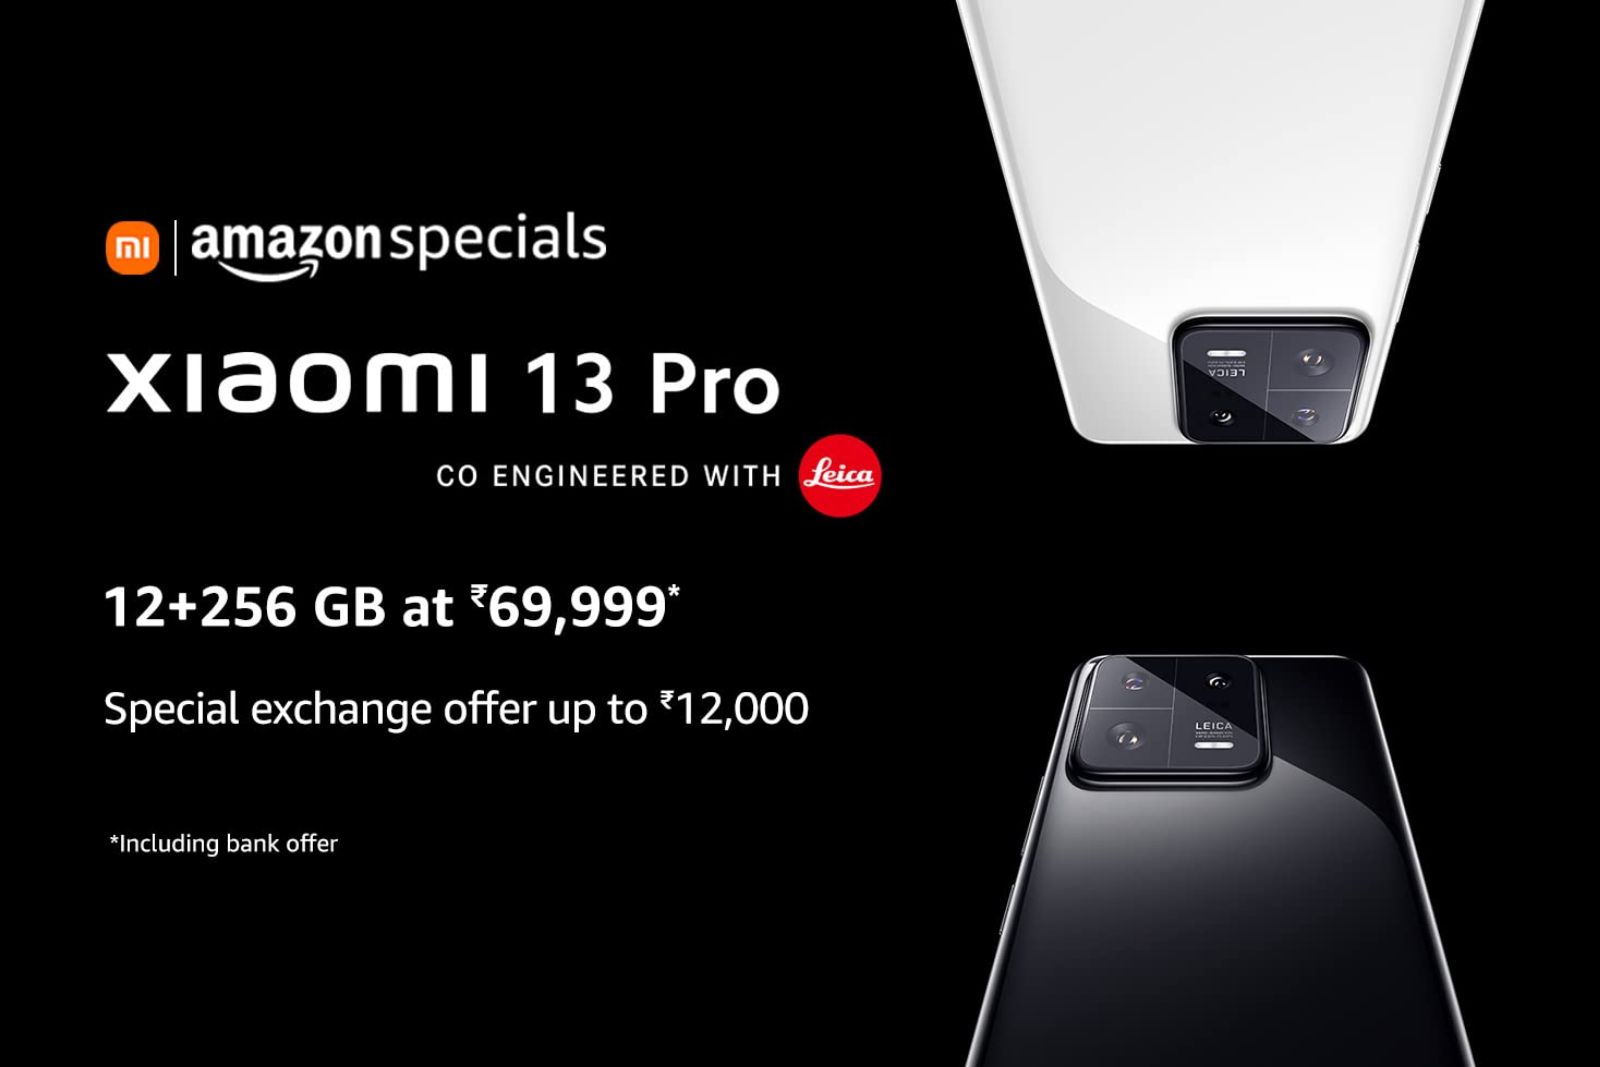 Xiaomi has officially launched the Xiaomi 13 series smartphones in India and the global market. Xiaomi 13 Pro is the successor to the Xiaomi 12 pro launched last year in India. In 2023 so far, many premium smartphone